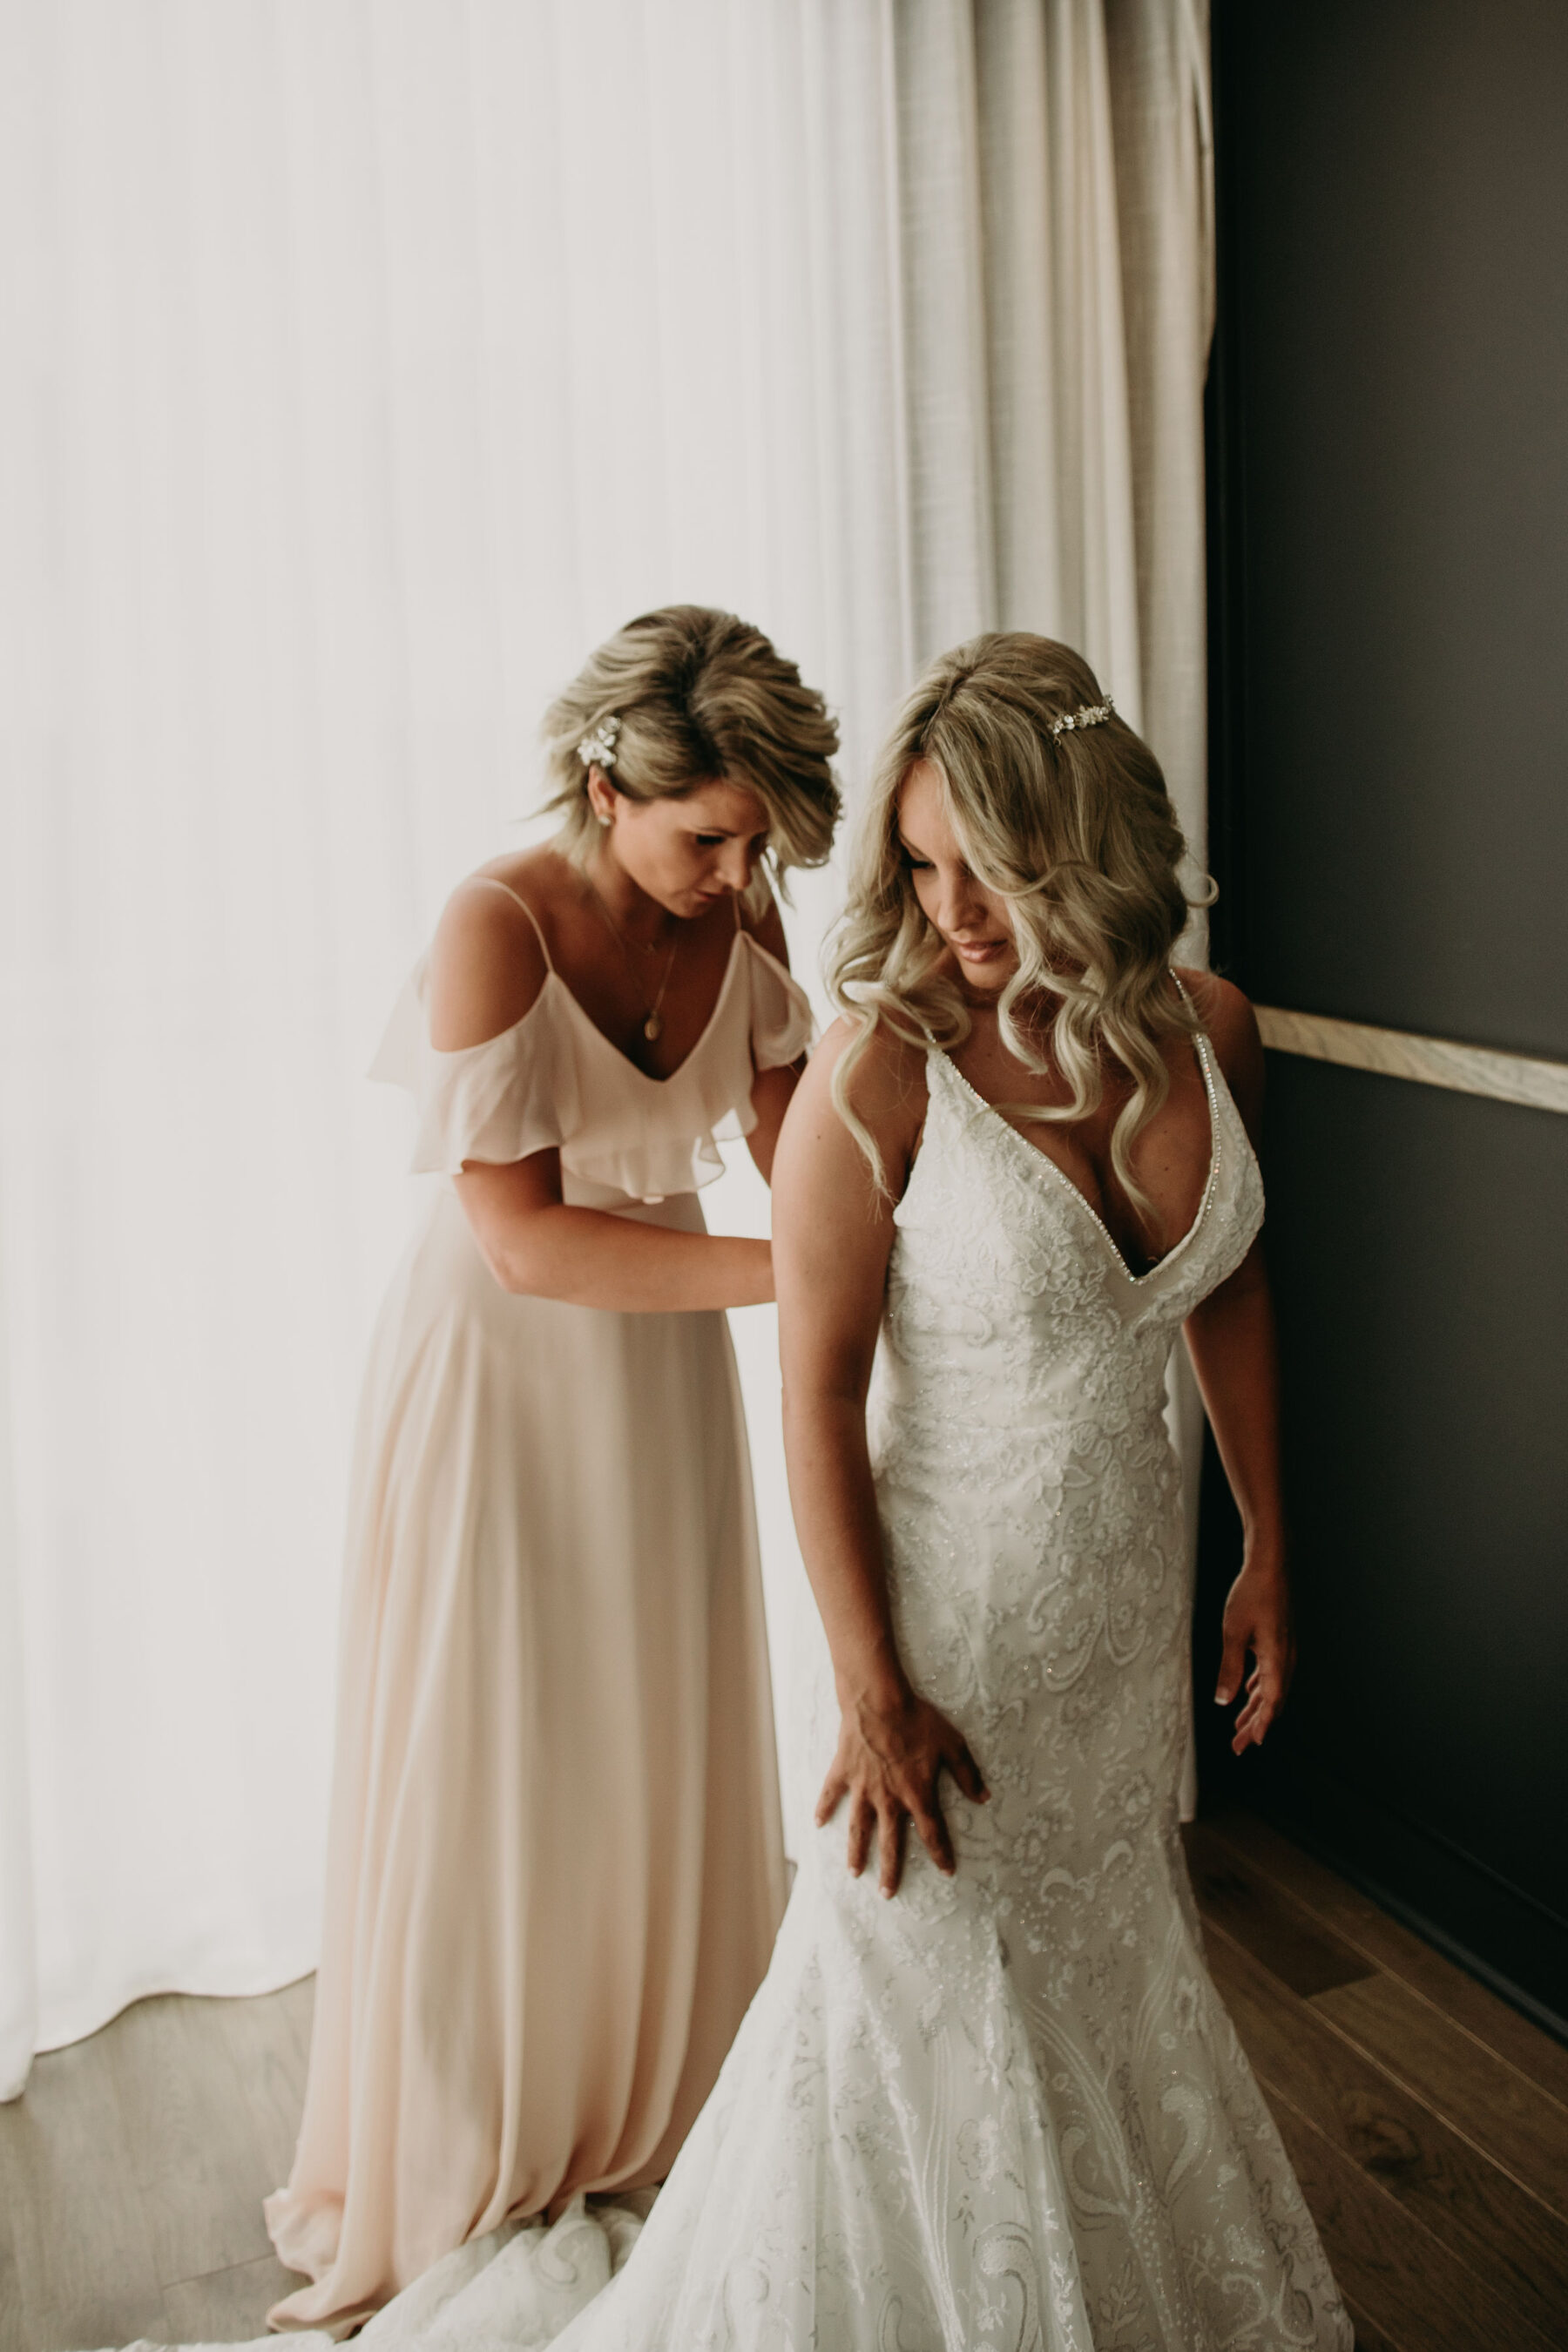 Summer Tennessee Wedding at Noelle from Jayde J. Smith Events featured on Nashville Bride Guide